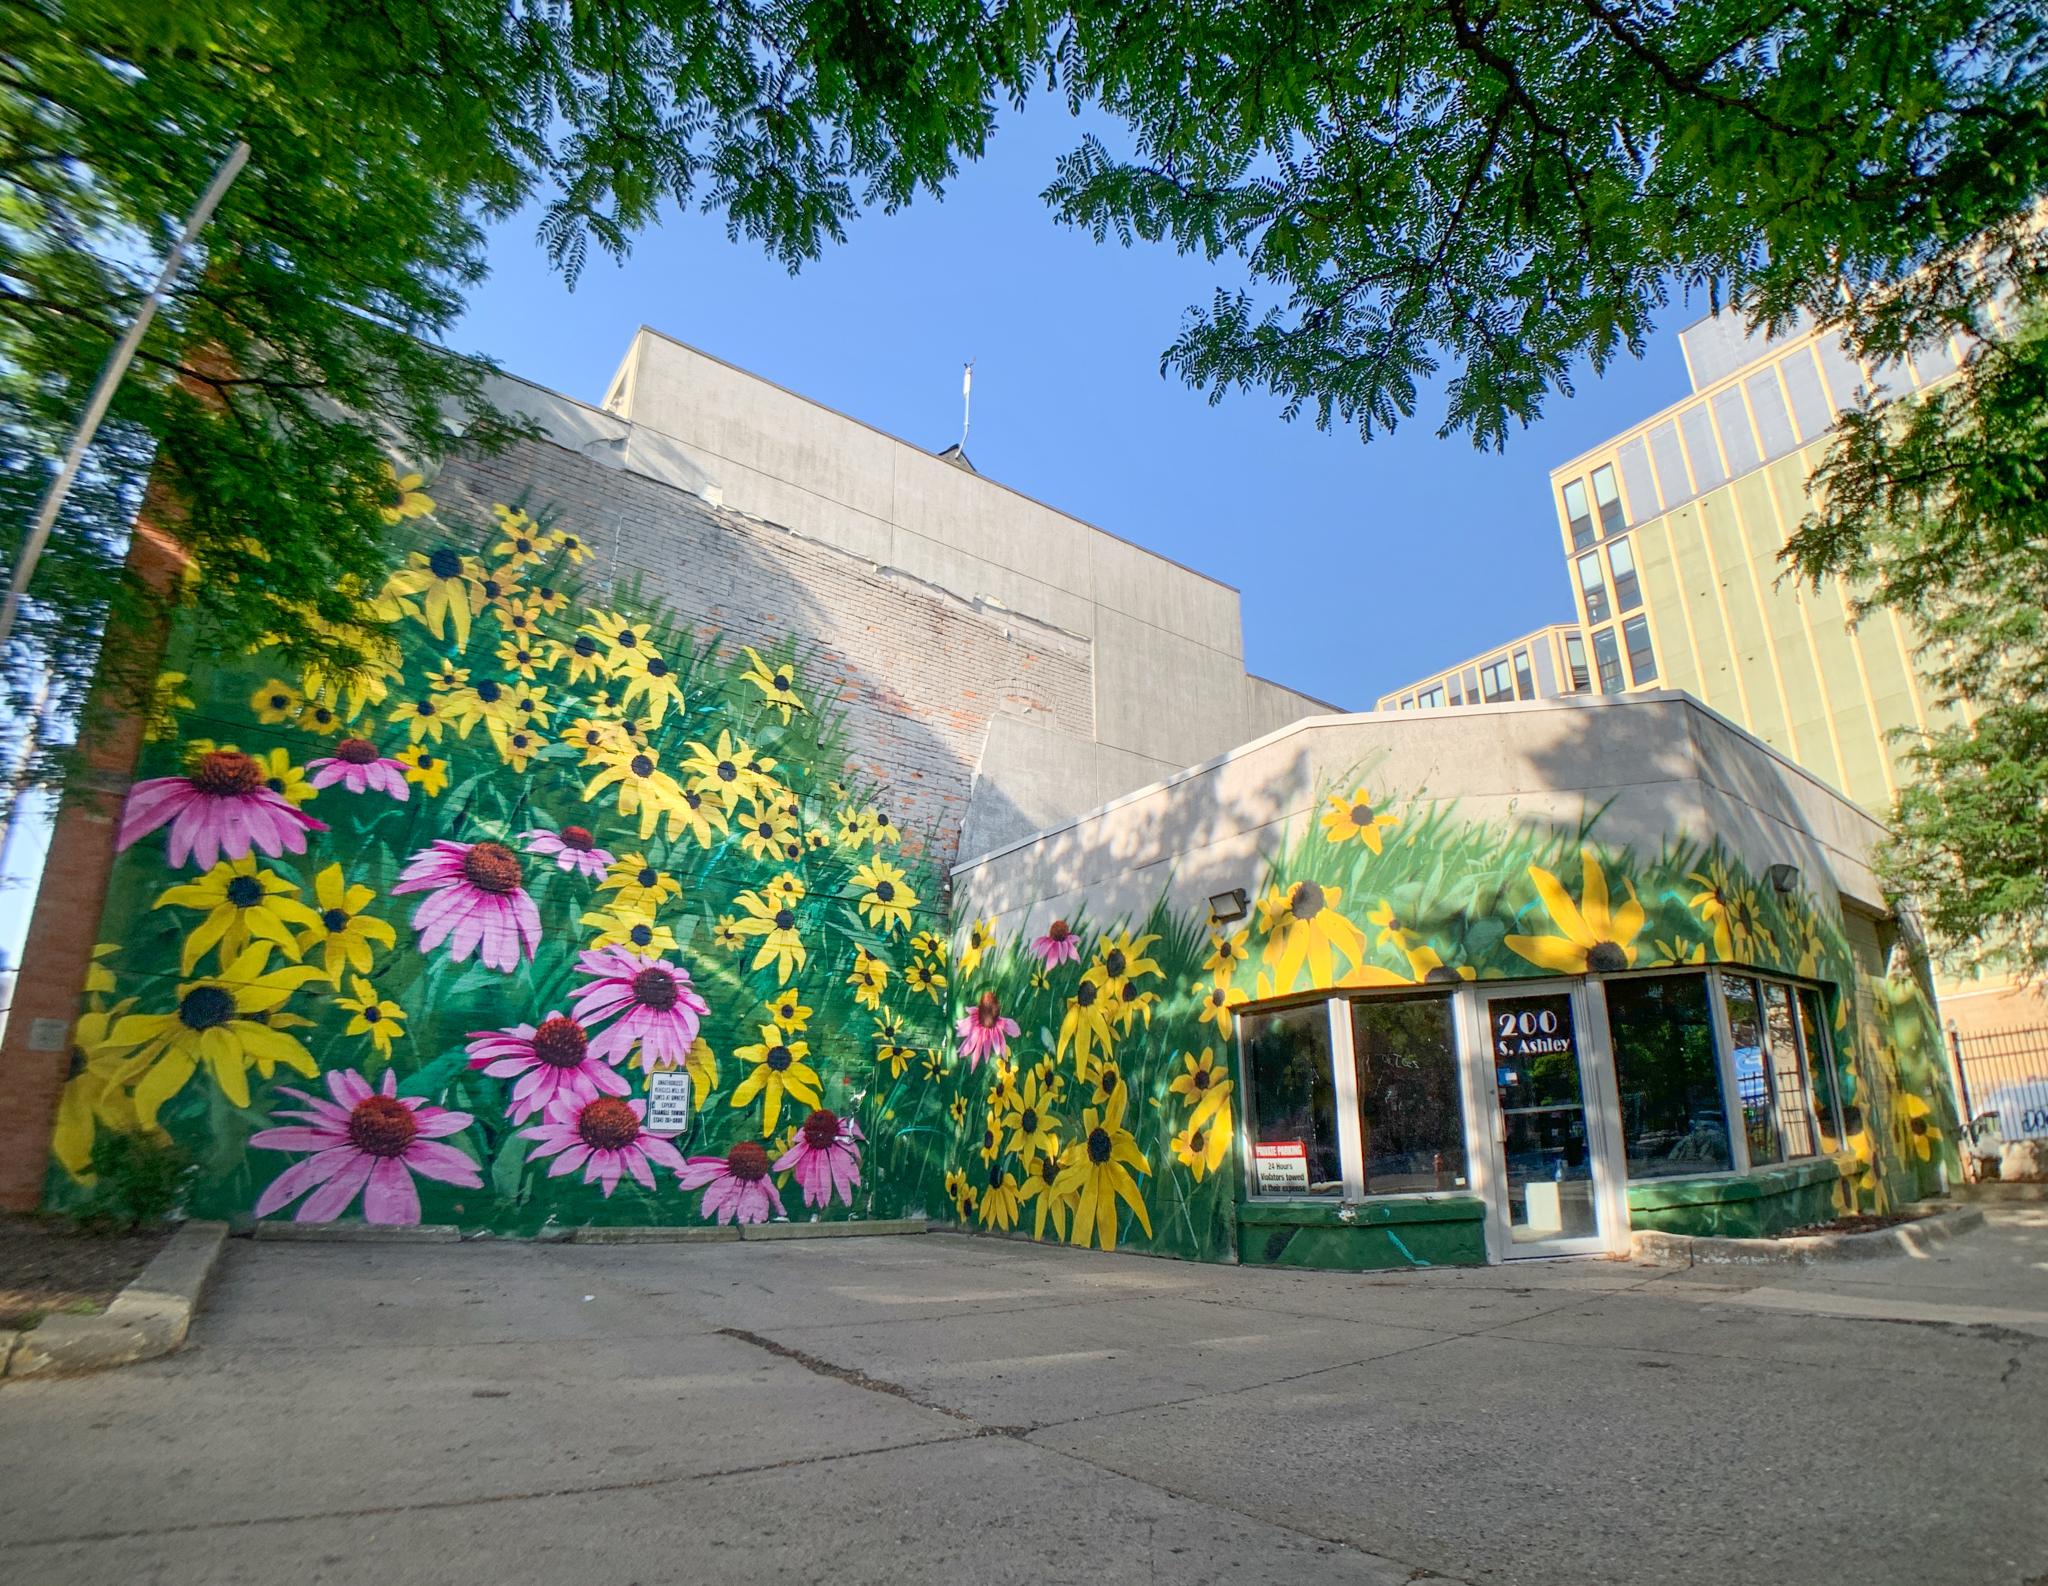 Sip mochas and learn about murals at a new Ann Arbor Art Center series